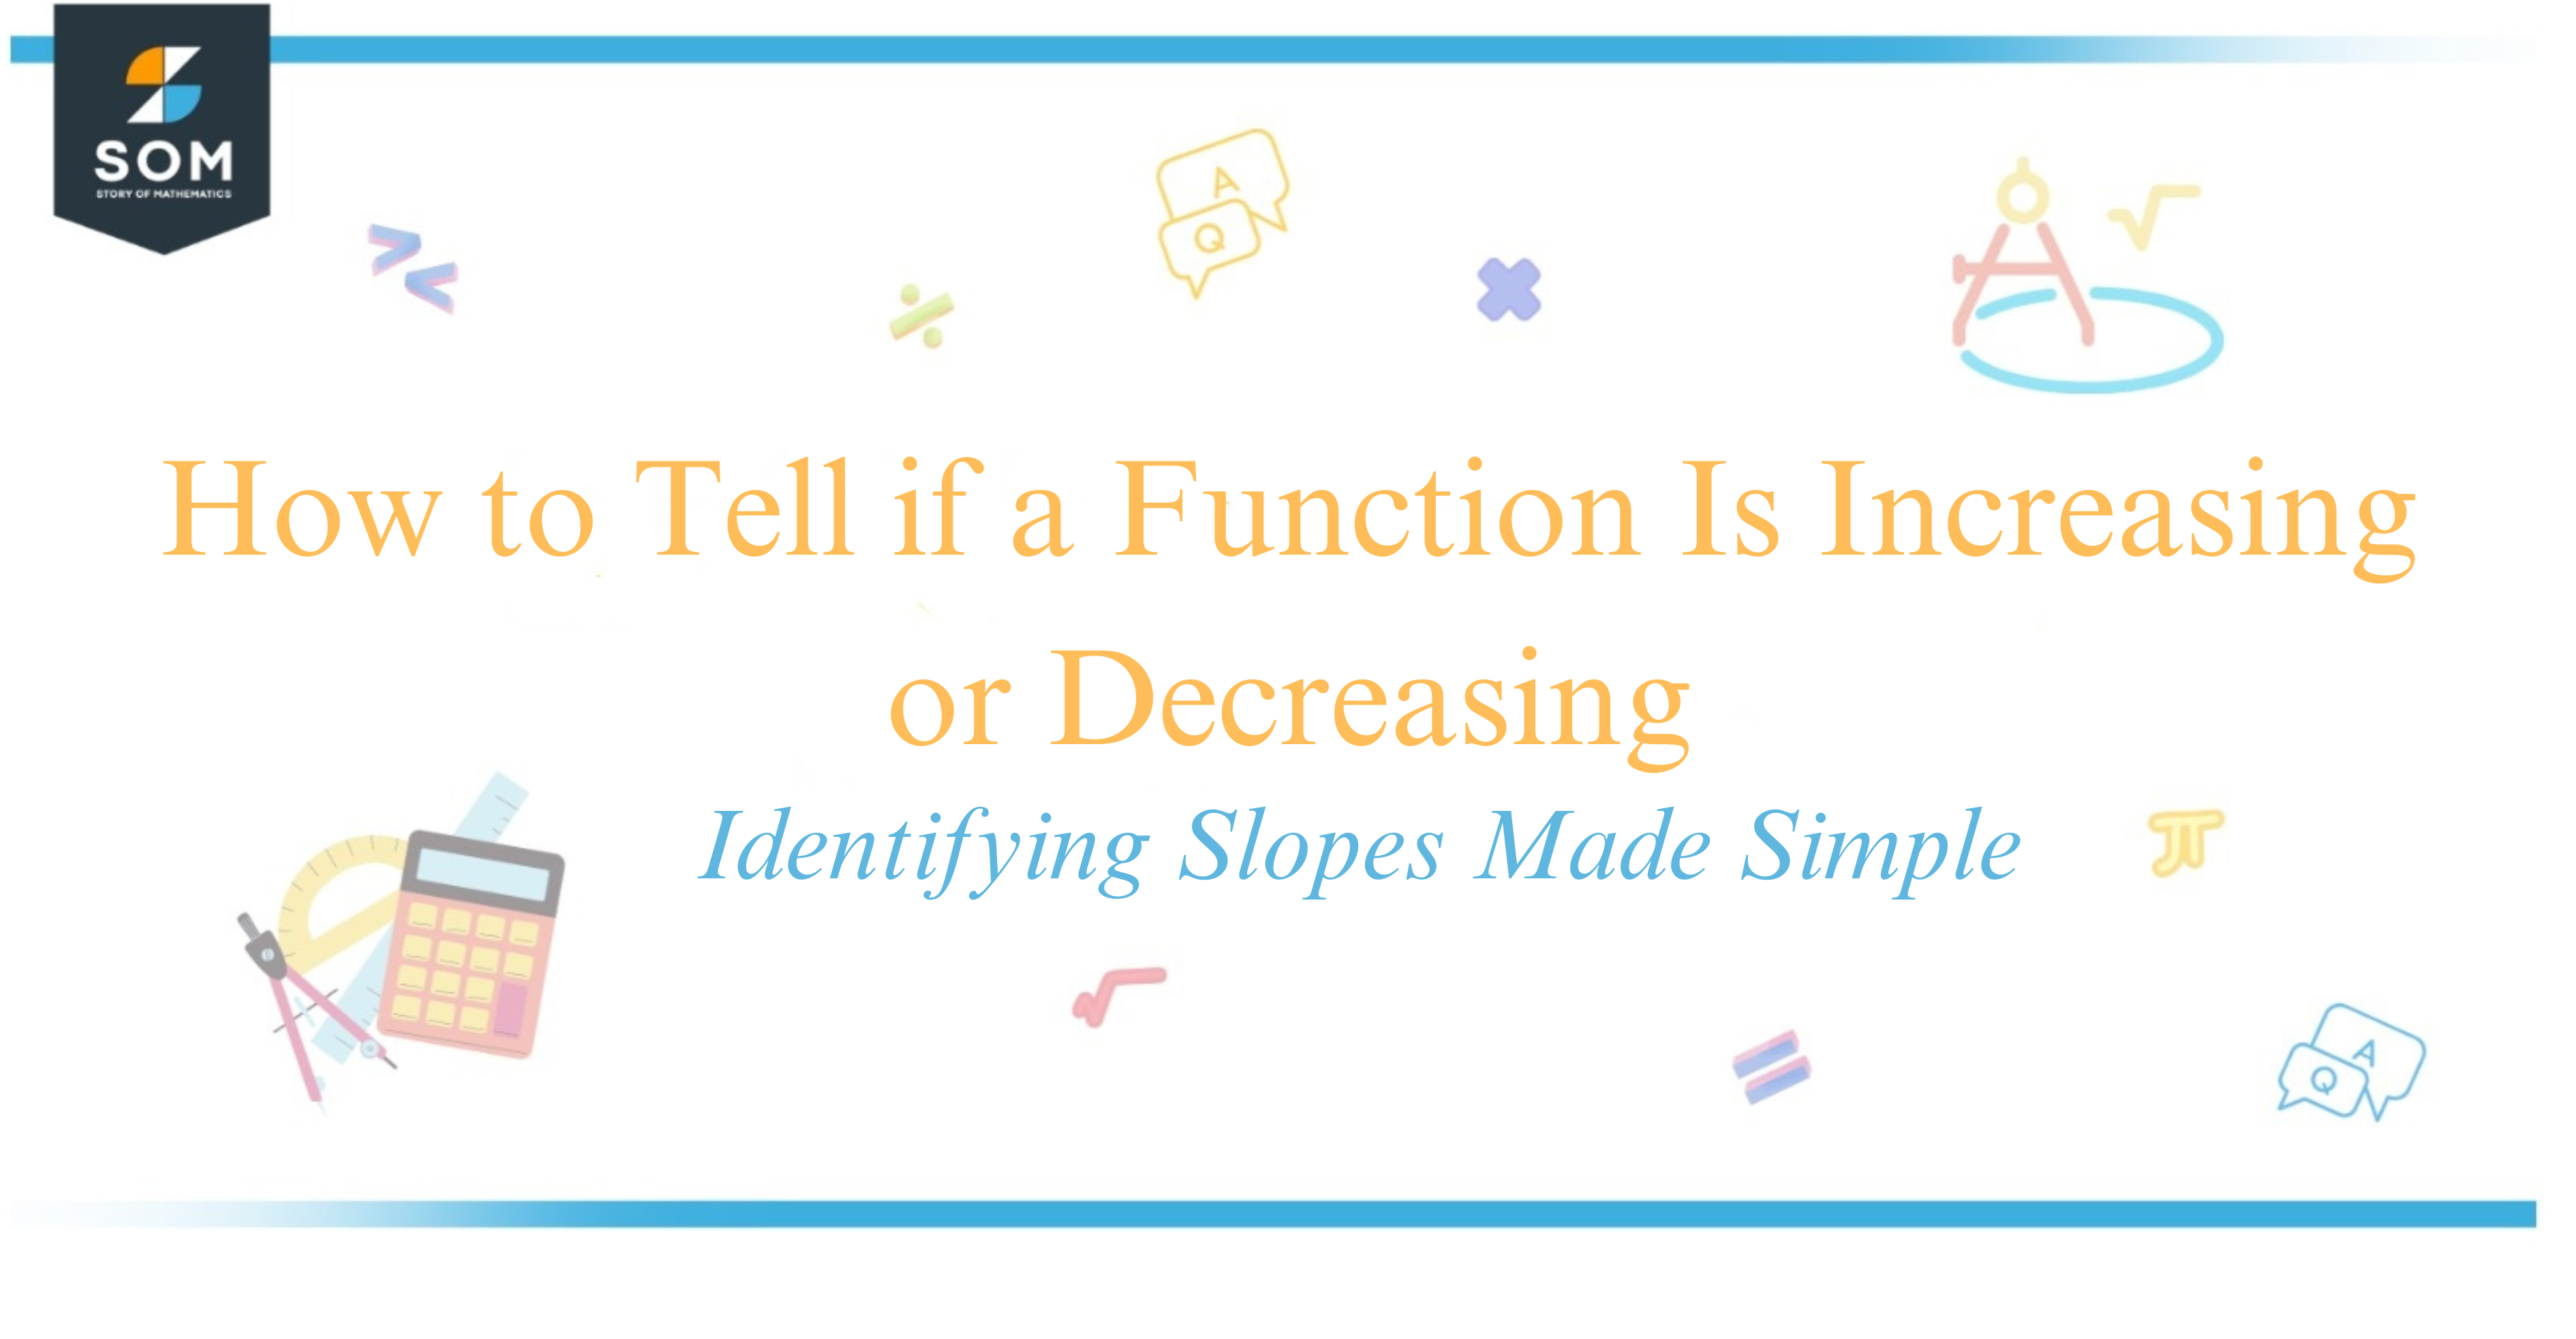 How to Tell if a Function Is Increasing or Decreasing Identifying Slopes Made Simple